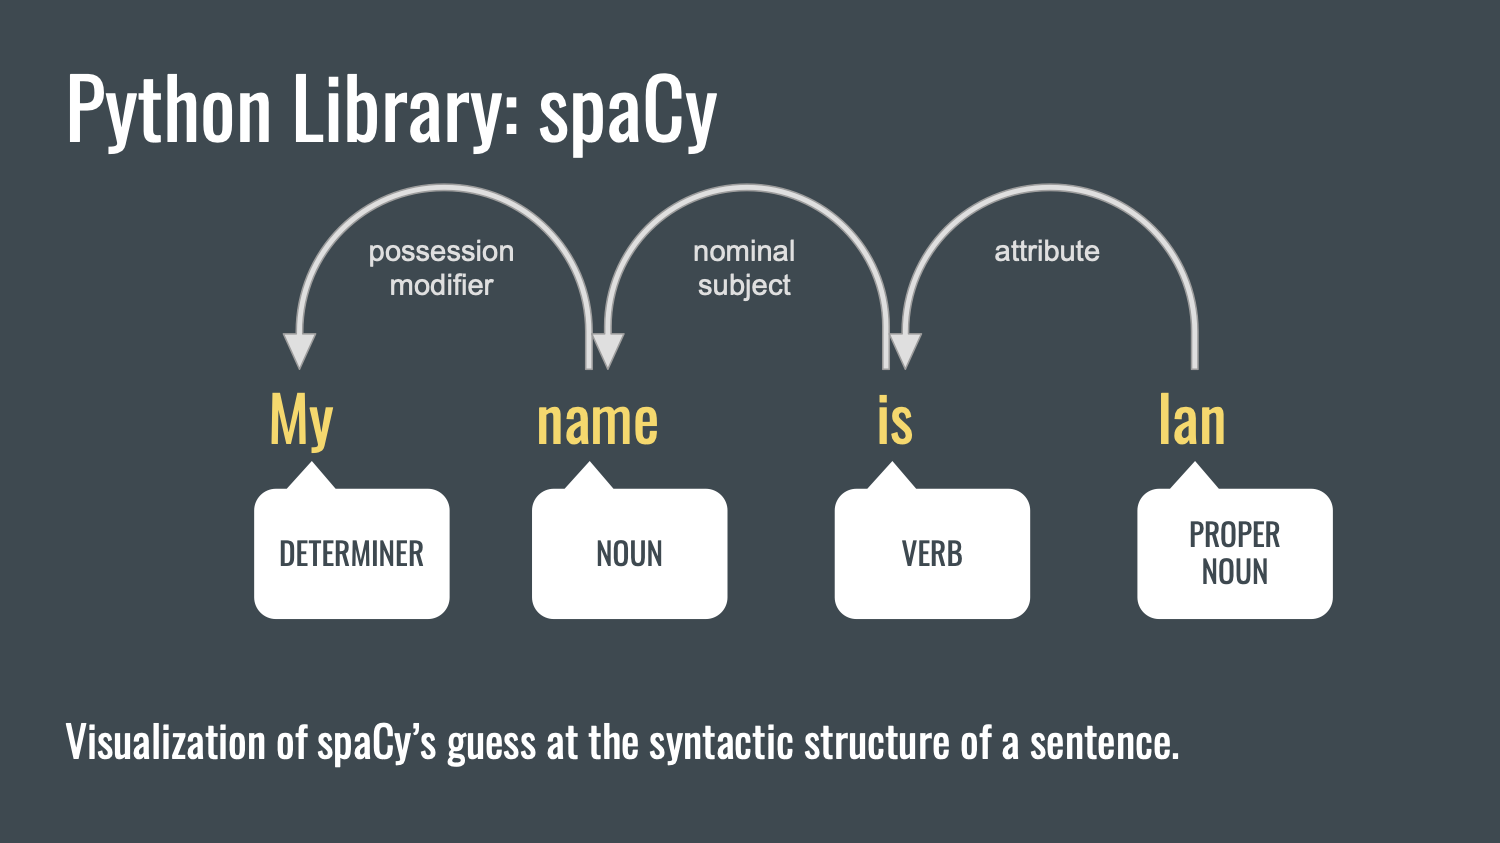 Parts-of-speech tagging using SpaCy